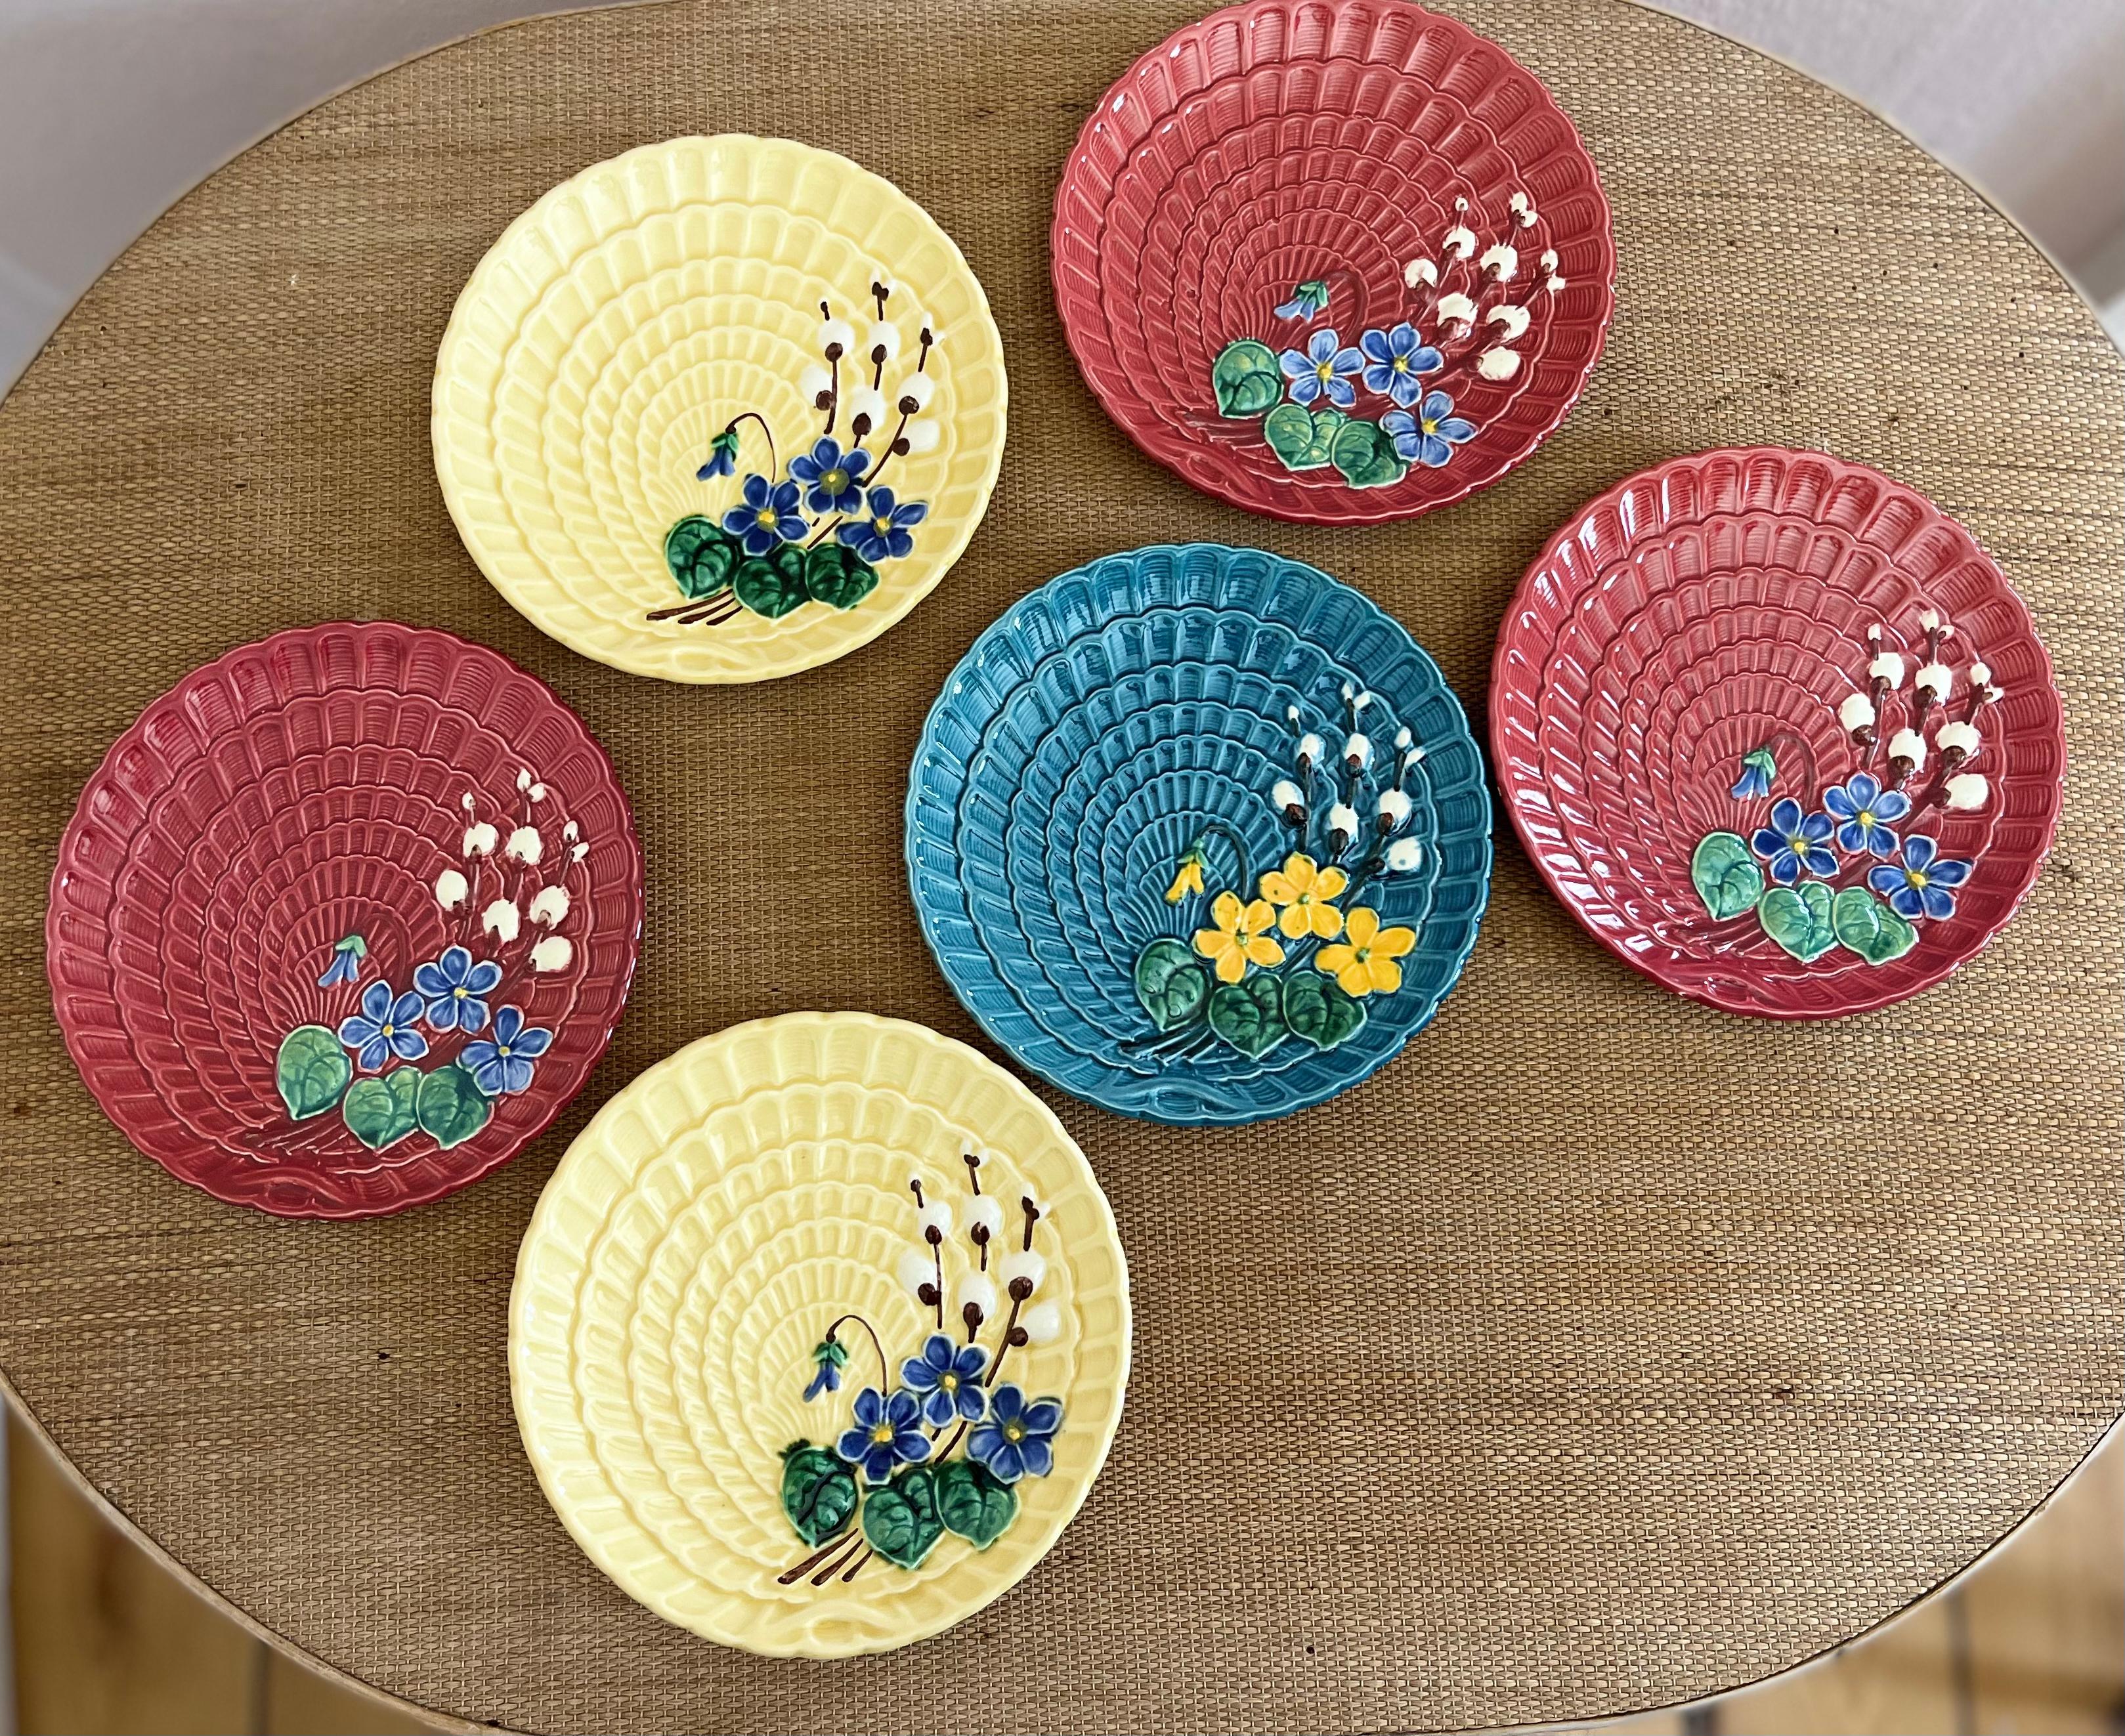 Set of 6 Italian vintage decorated plates

Set of 6 Italian decorated vintage plates in different colours. Relief kind of ceramics with beautiful flowers. Each plate has a diameter of 16 cm (6.3 in). Great vintage condition, no flaws.

Diameter: 16